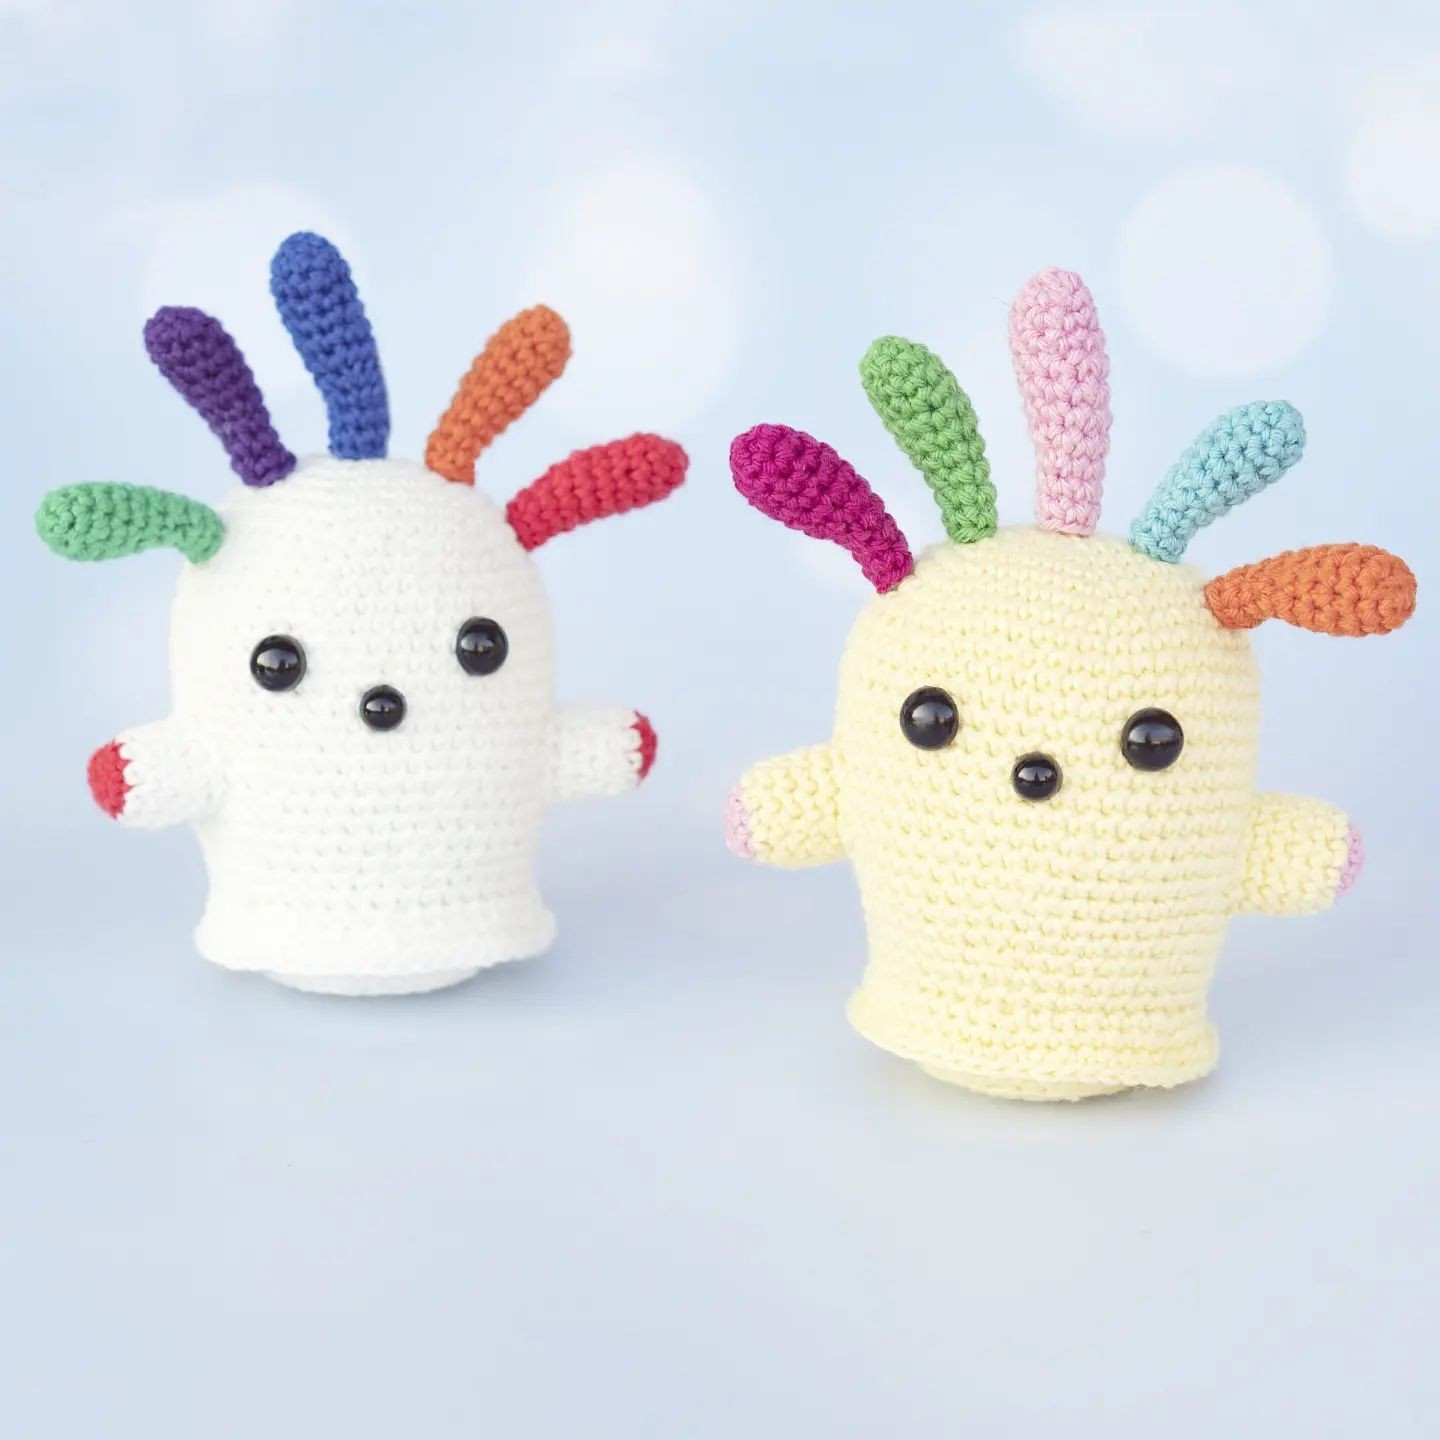 free crochet pattern no name (ghost )